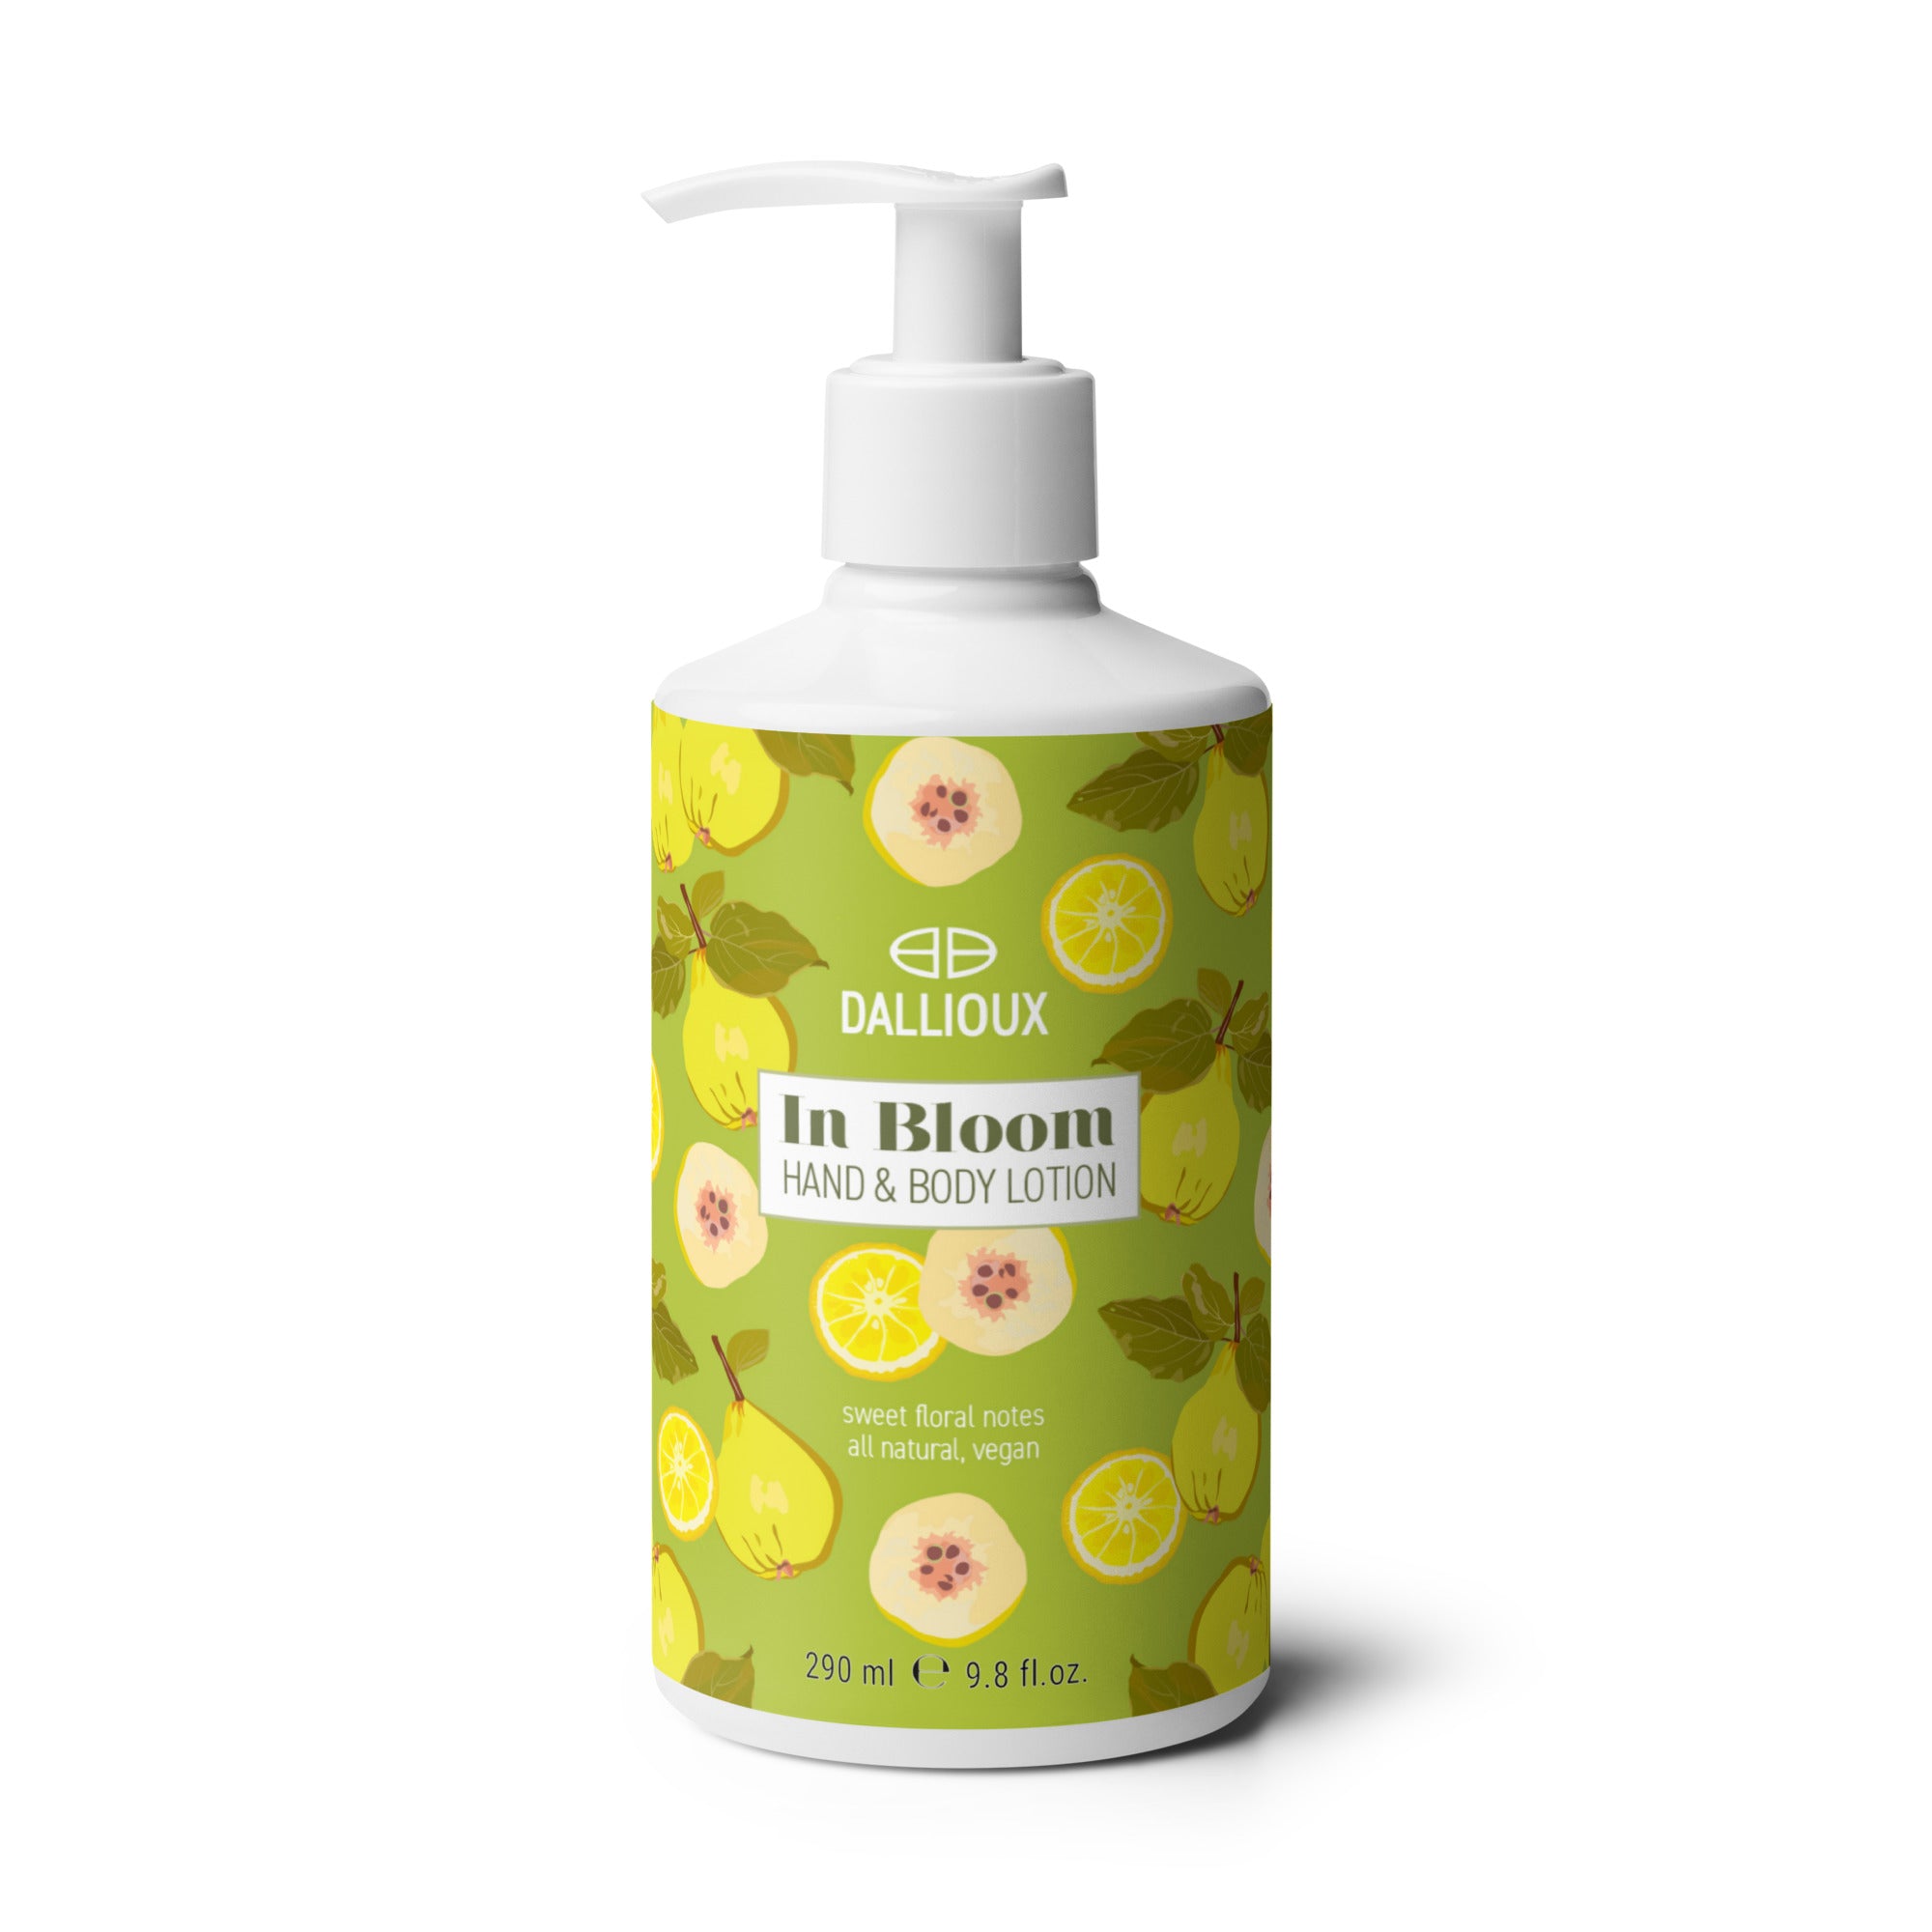 In Bloom Hand & Body Lotion